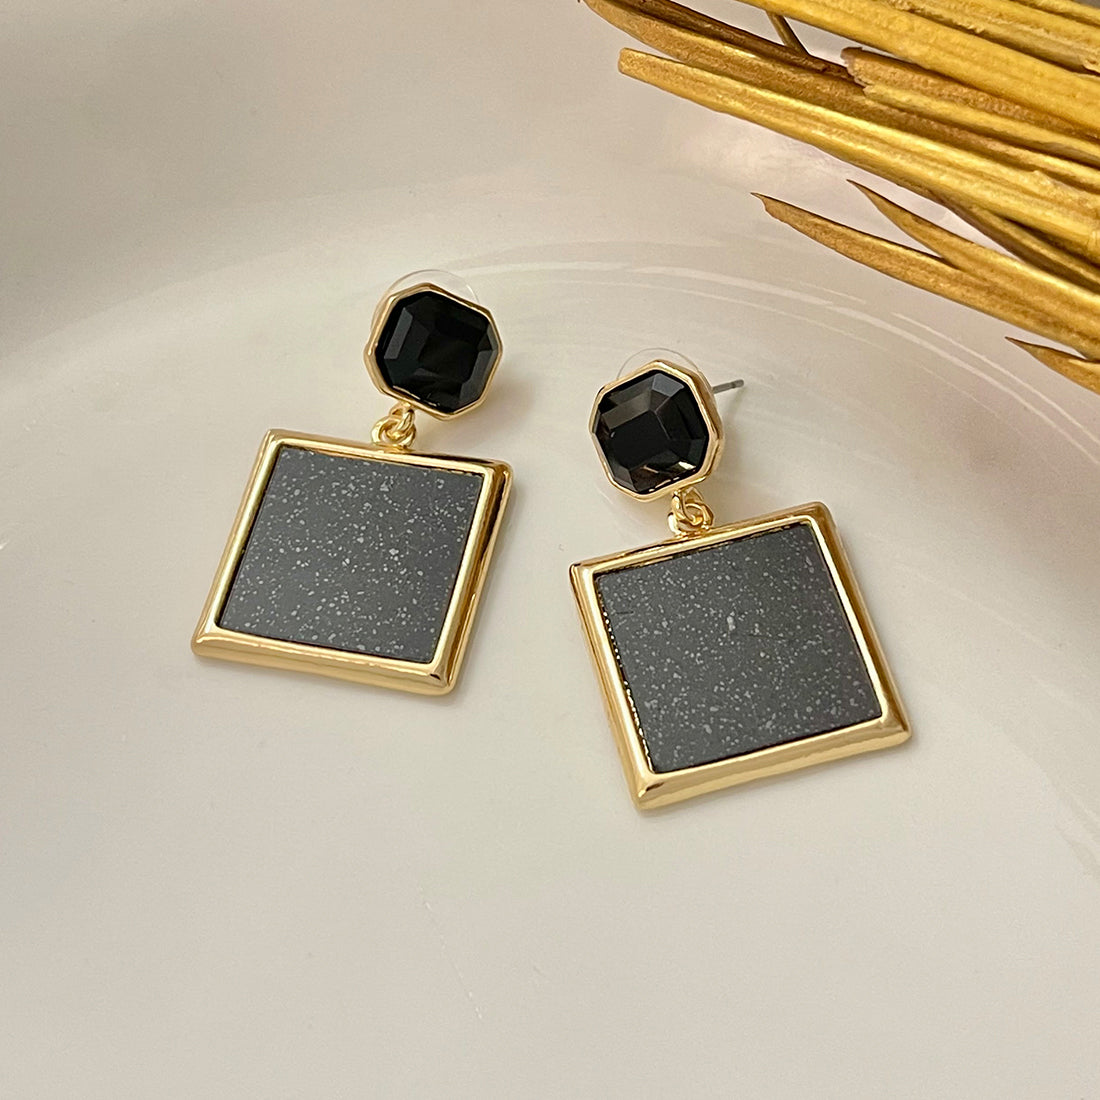 Contemporary Black Acrylic Gold-Toned Hexagon Rhinestone with Square Drop Earrings